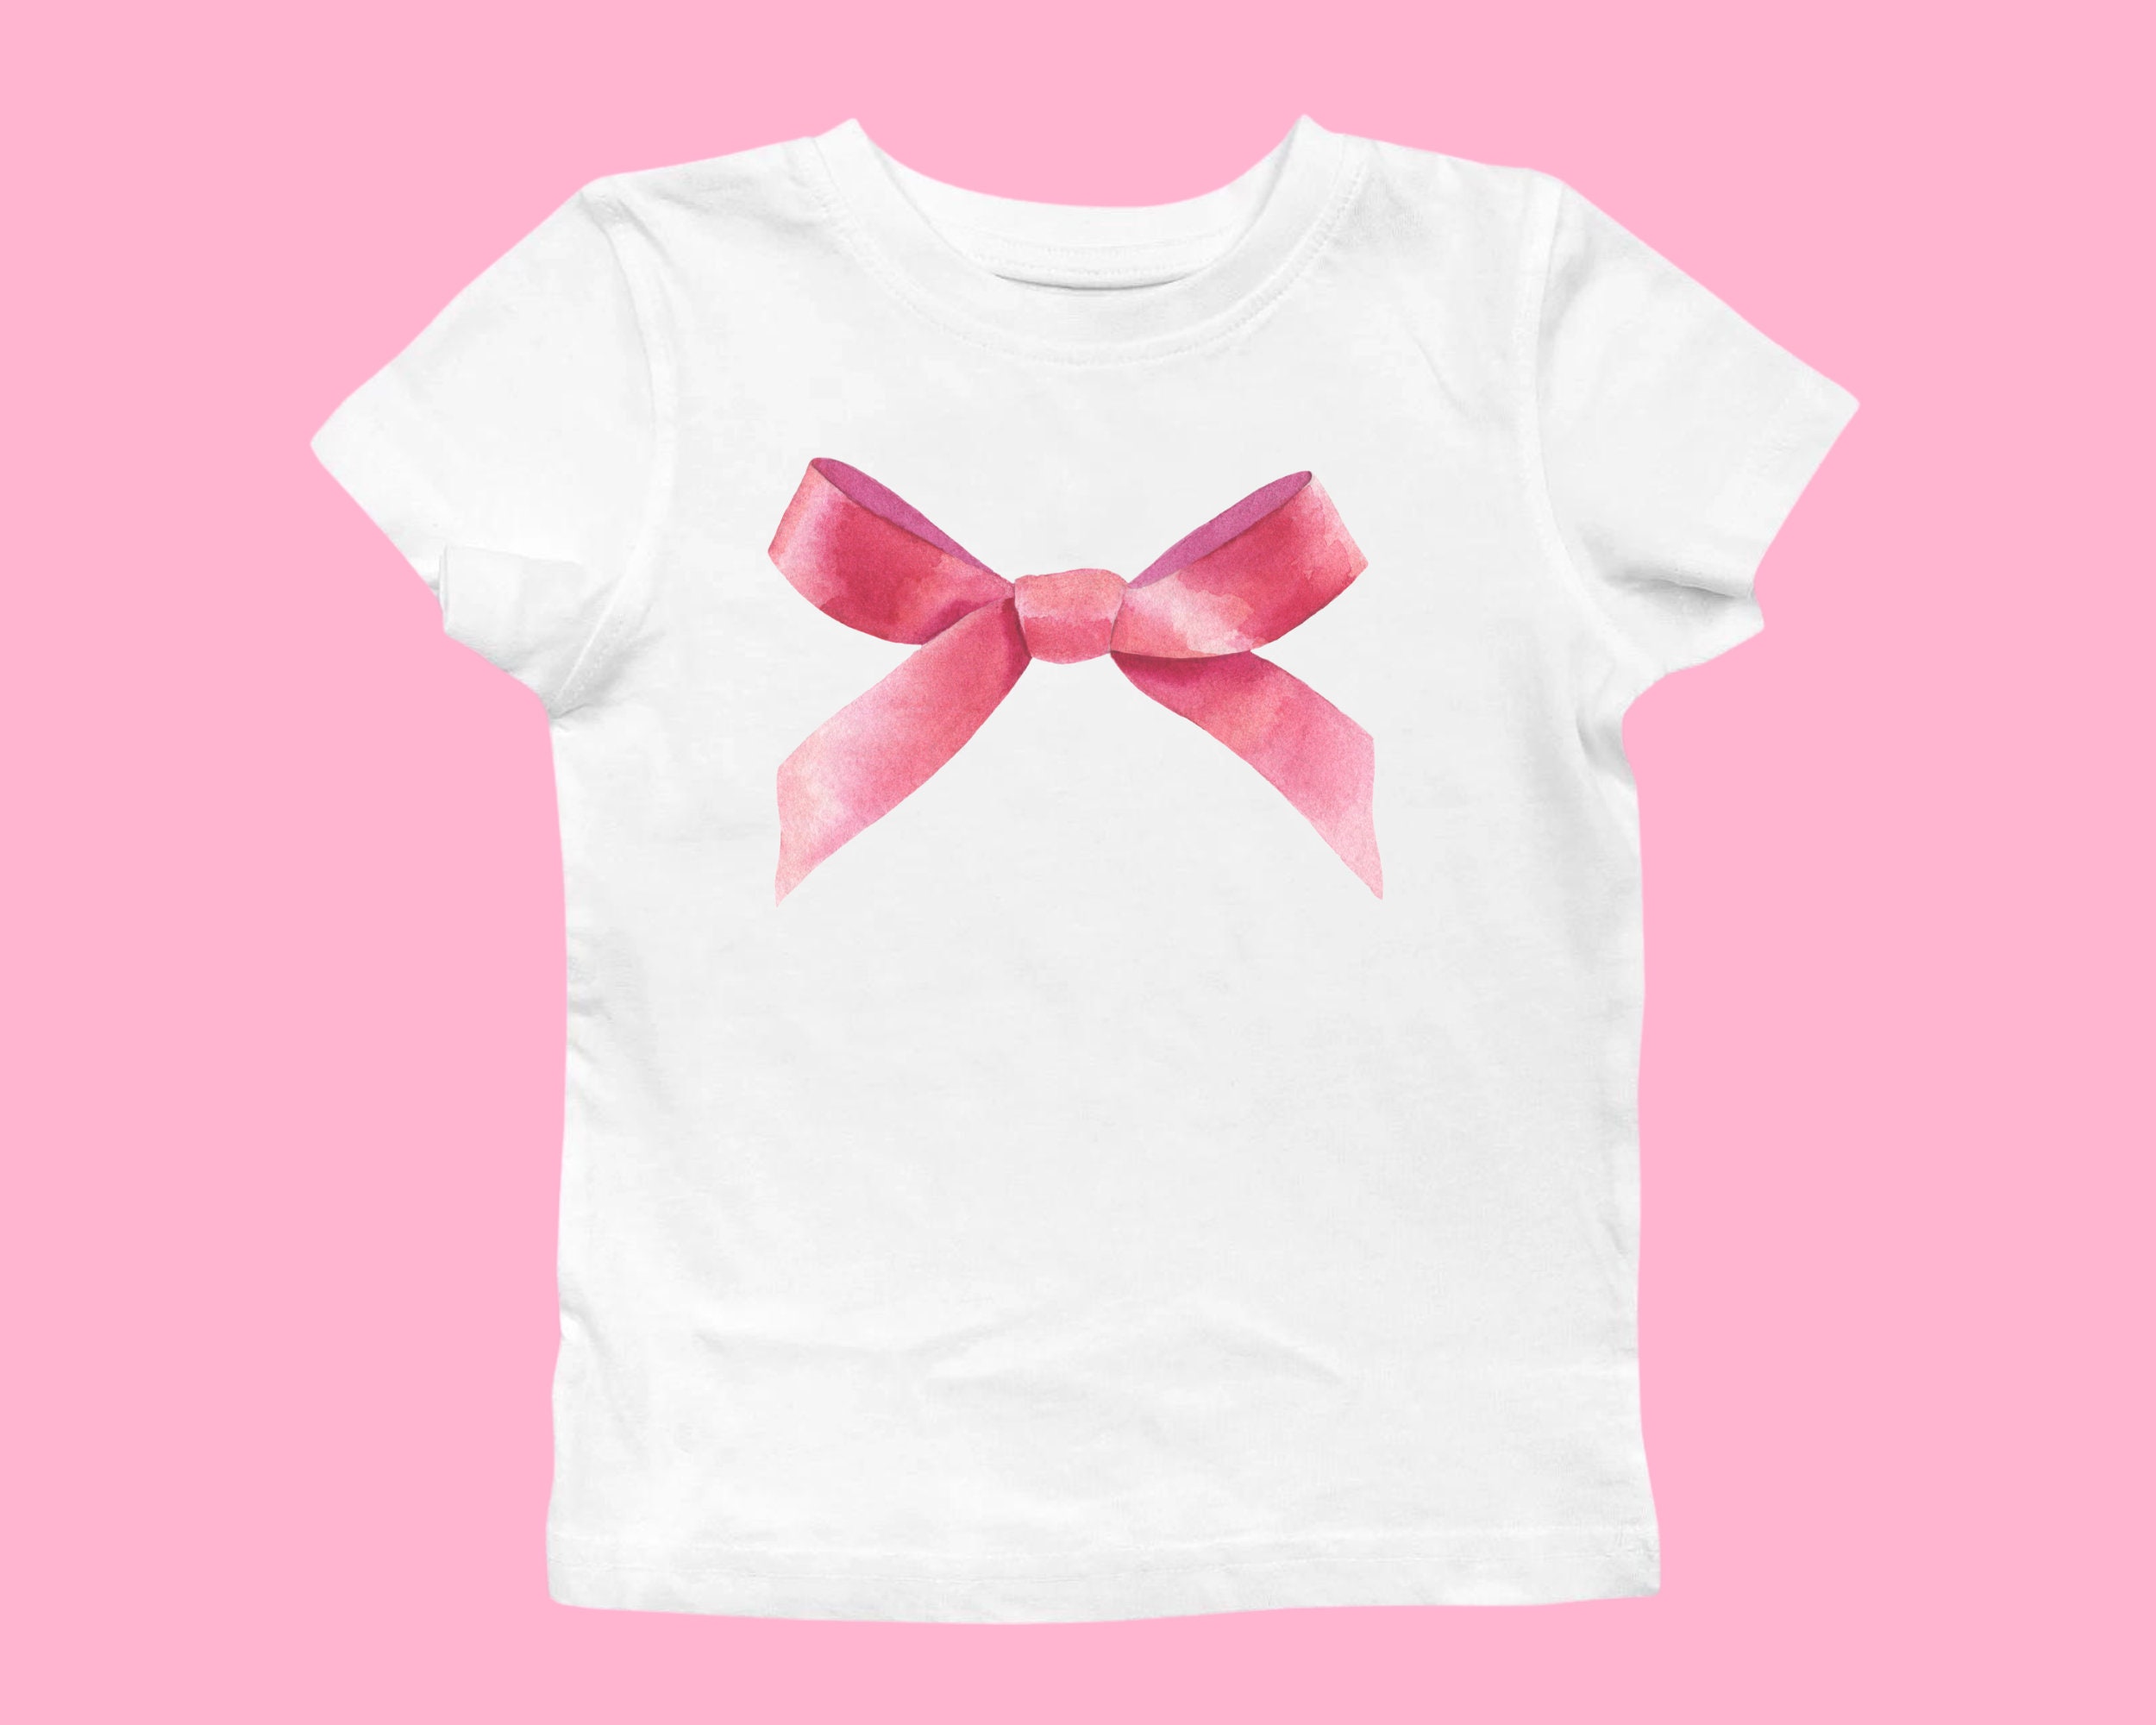 Coquette Soft Pink Bow Baby Tee, Pinterest Girlcore Aesthetic